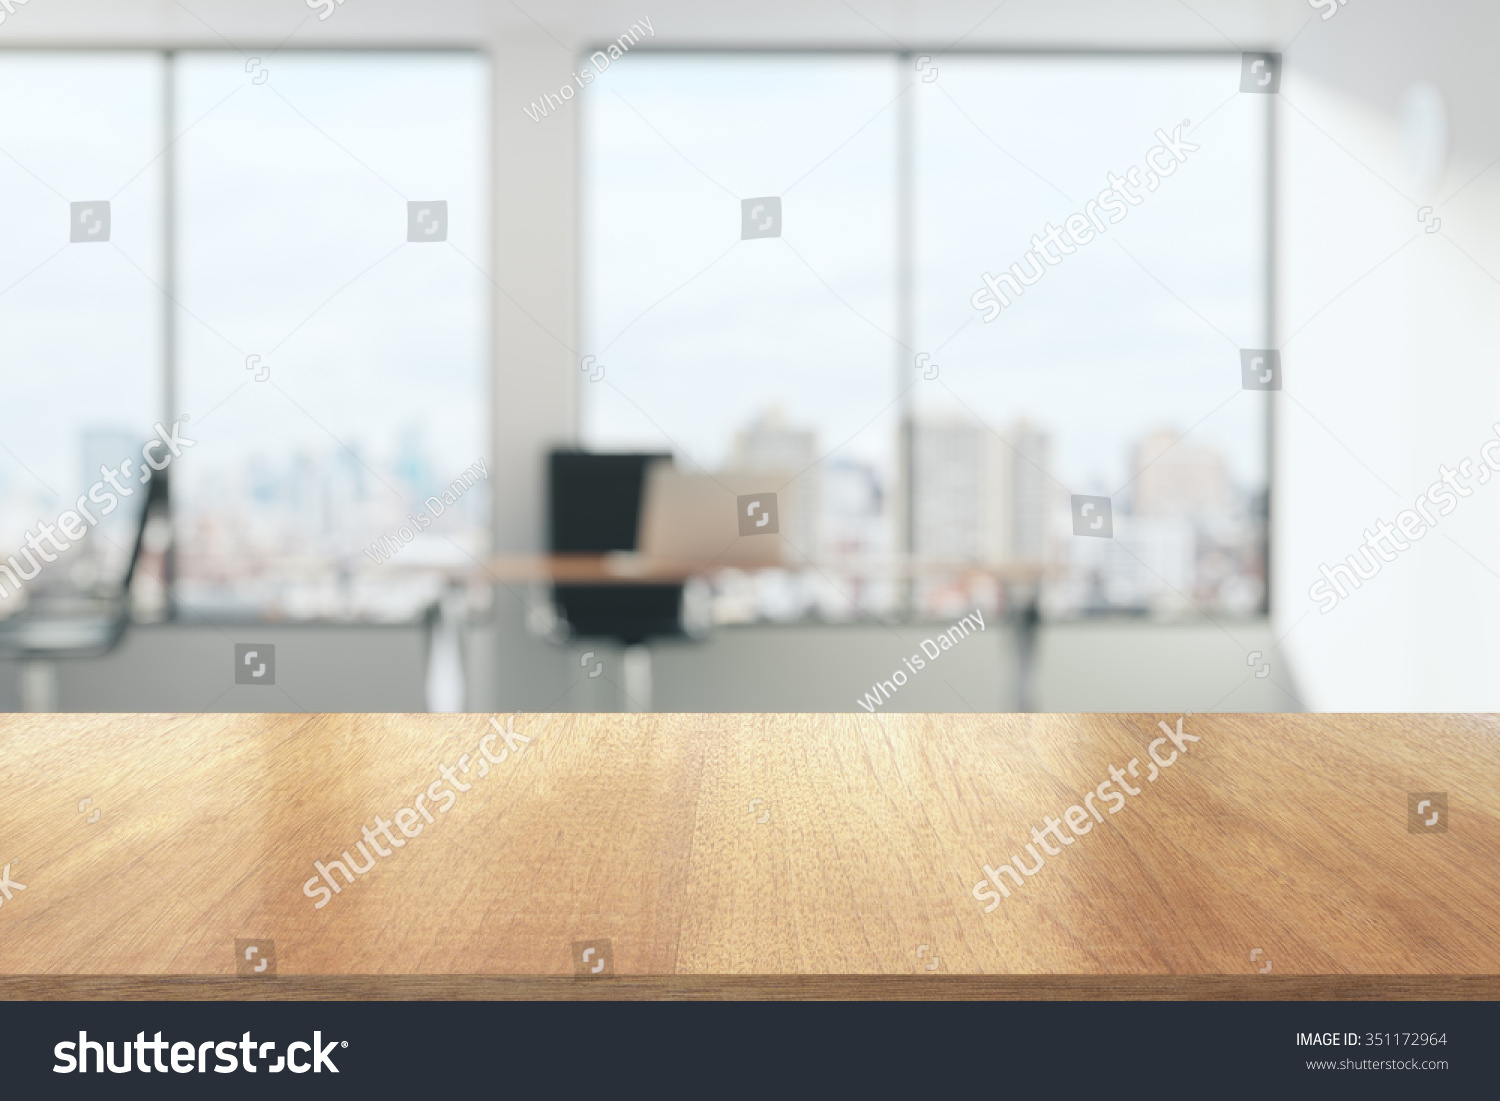 Wooden table in sunny office with big windows #351172964